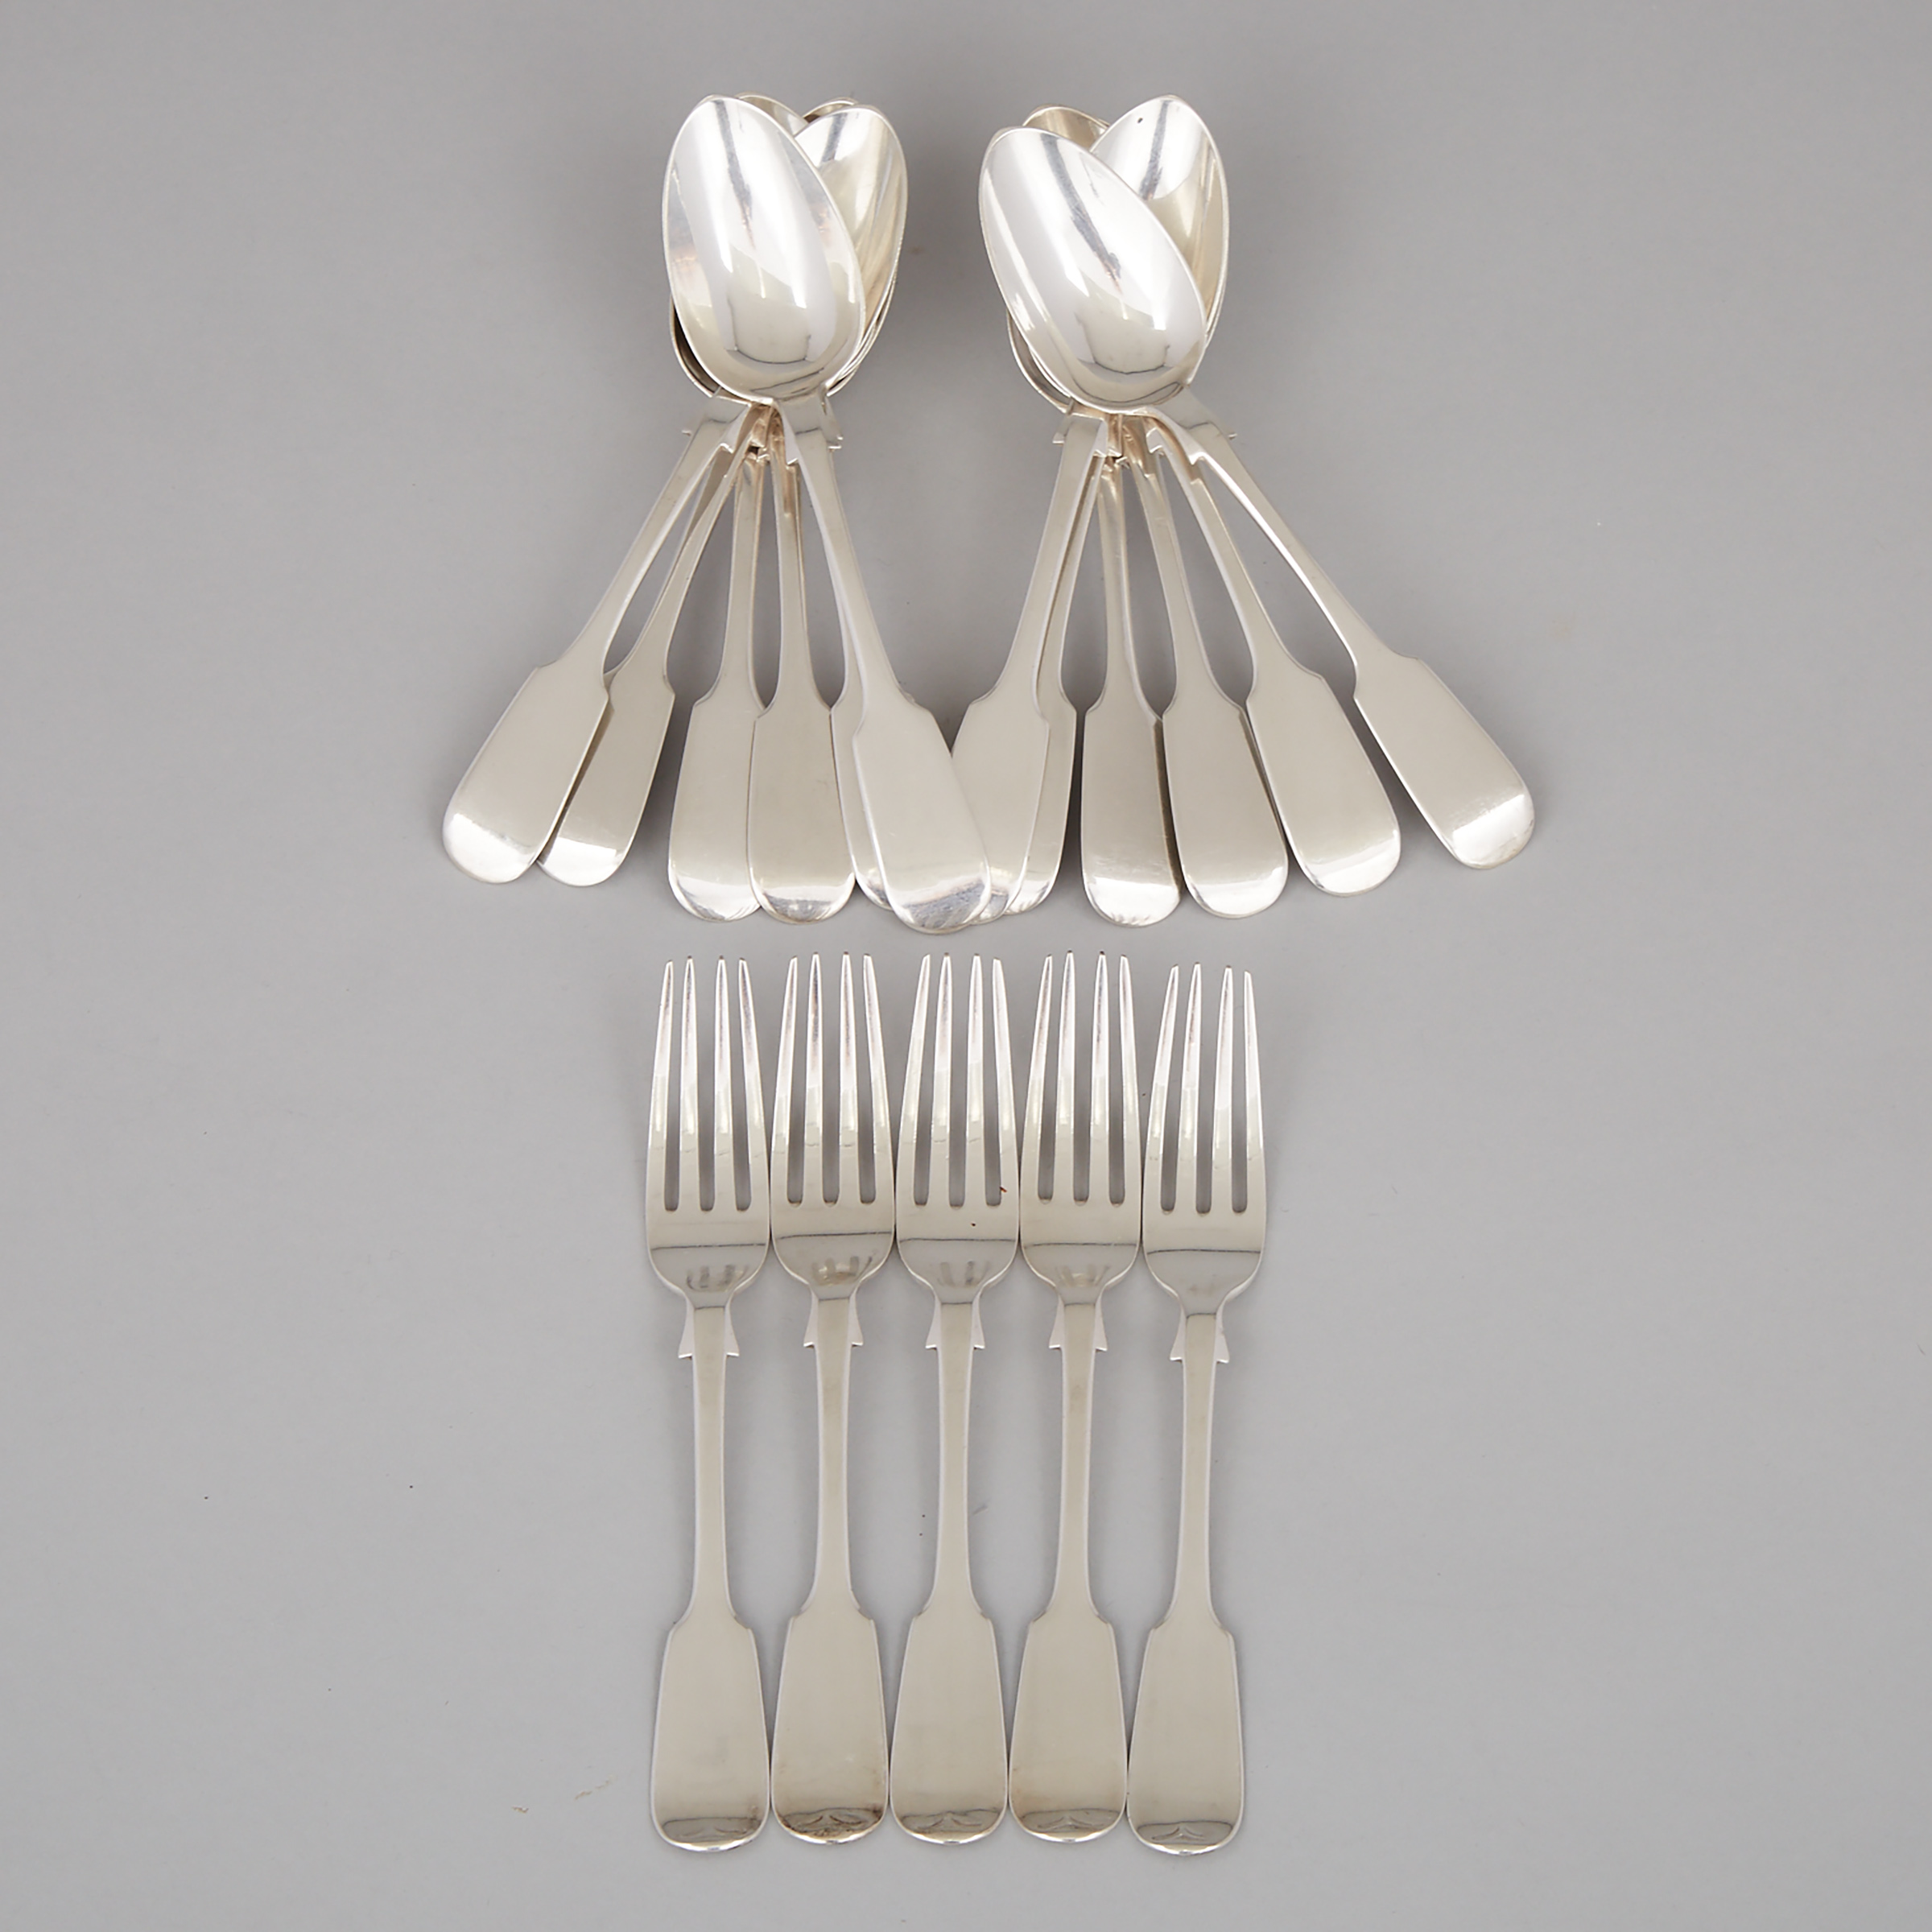 Twelve Canadian Silver Fiddle Pattern Dessert Spoons and Five Dessert Forks, Hendery & Leslie, Montreal, Que., for Canada Mfg. Co., late 19th century